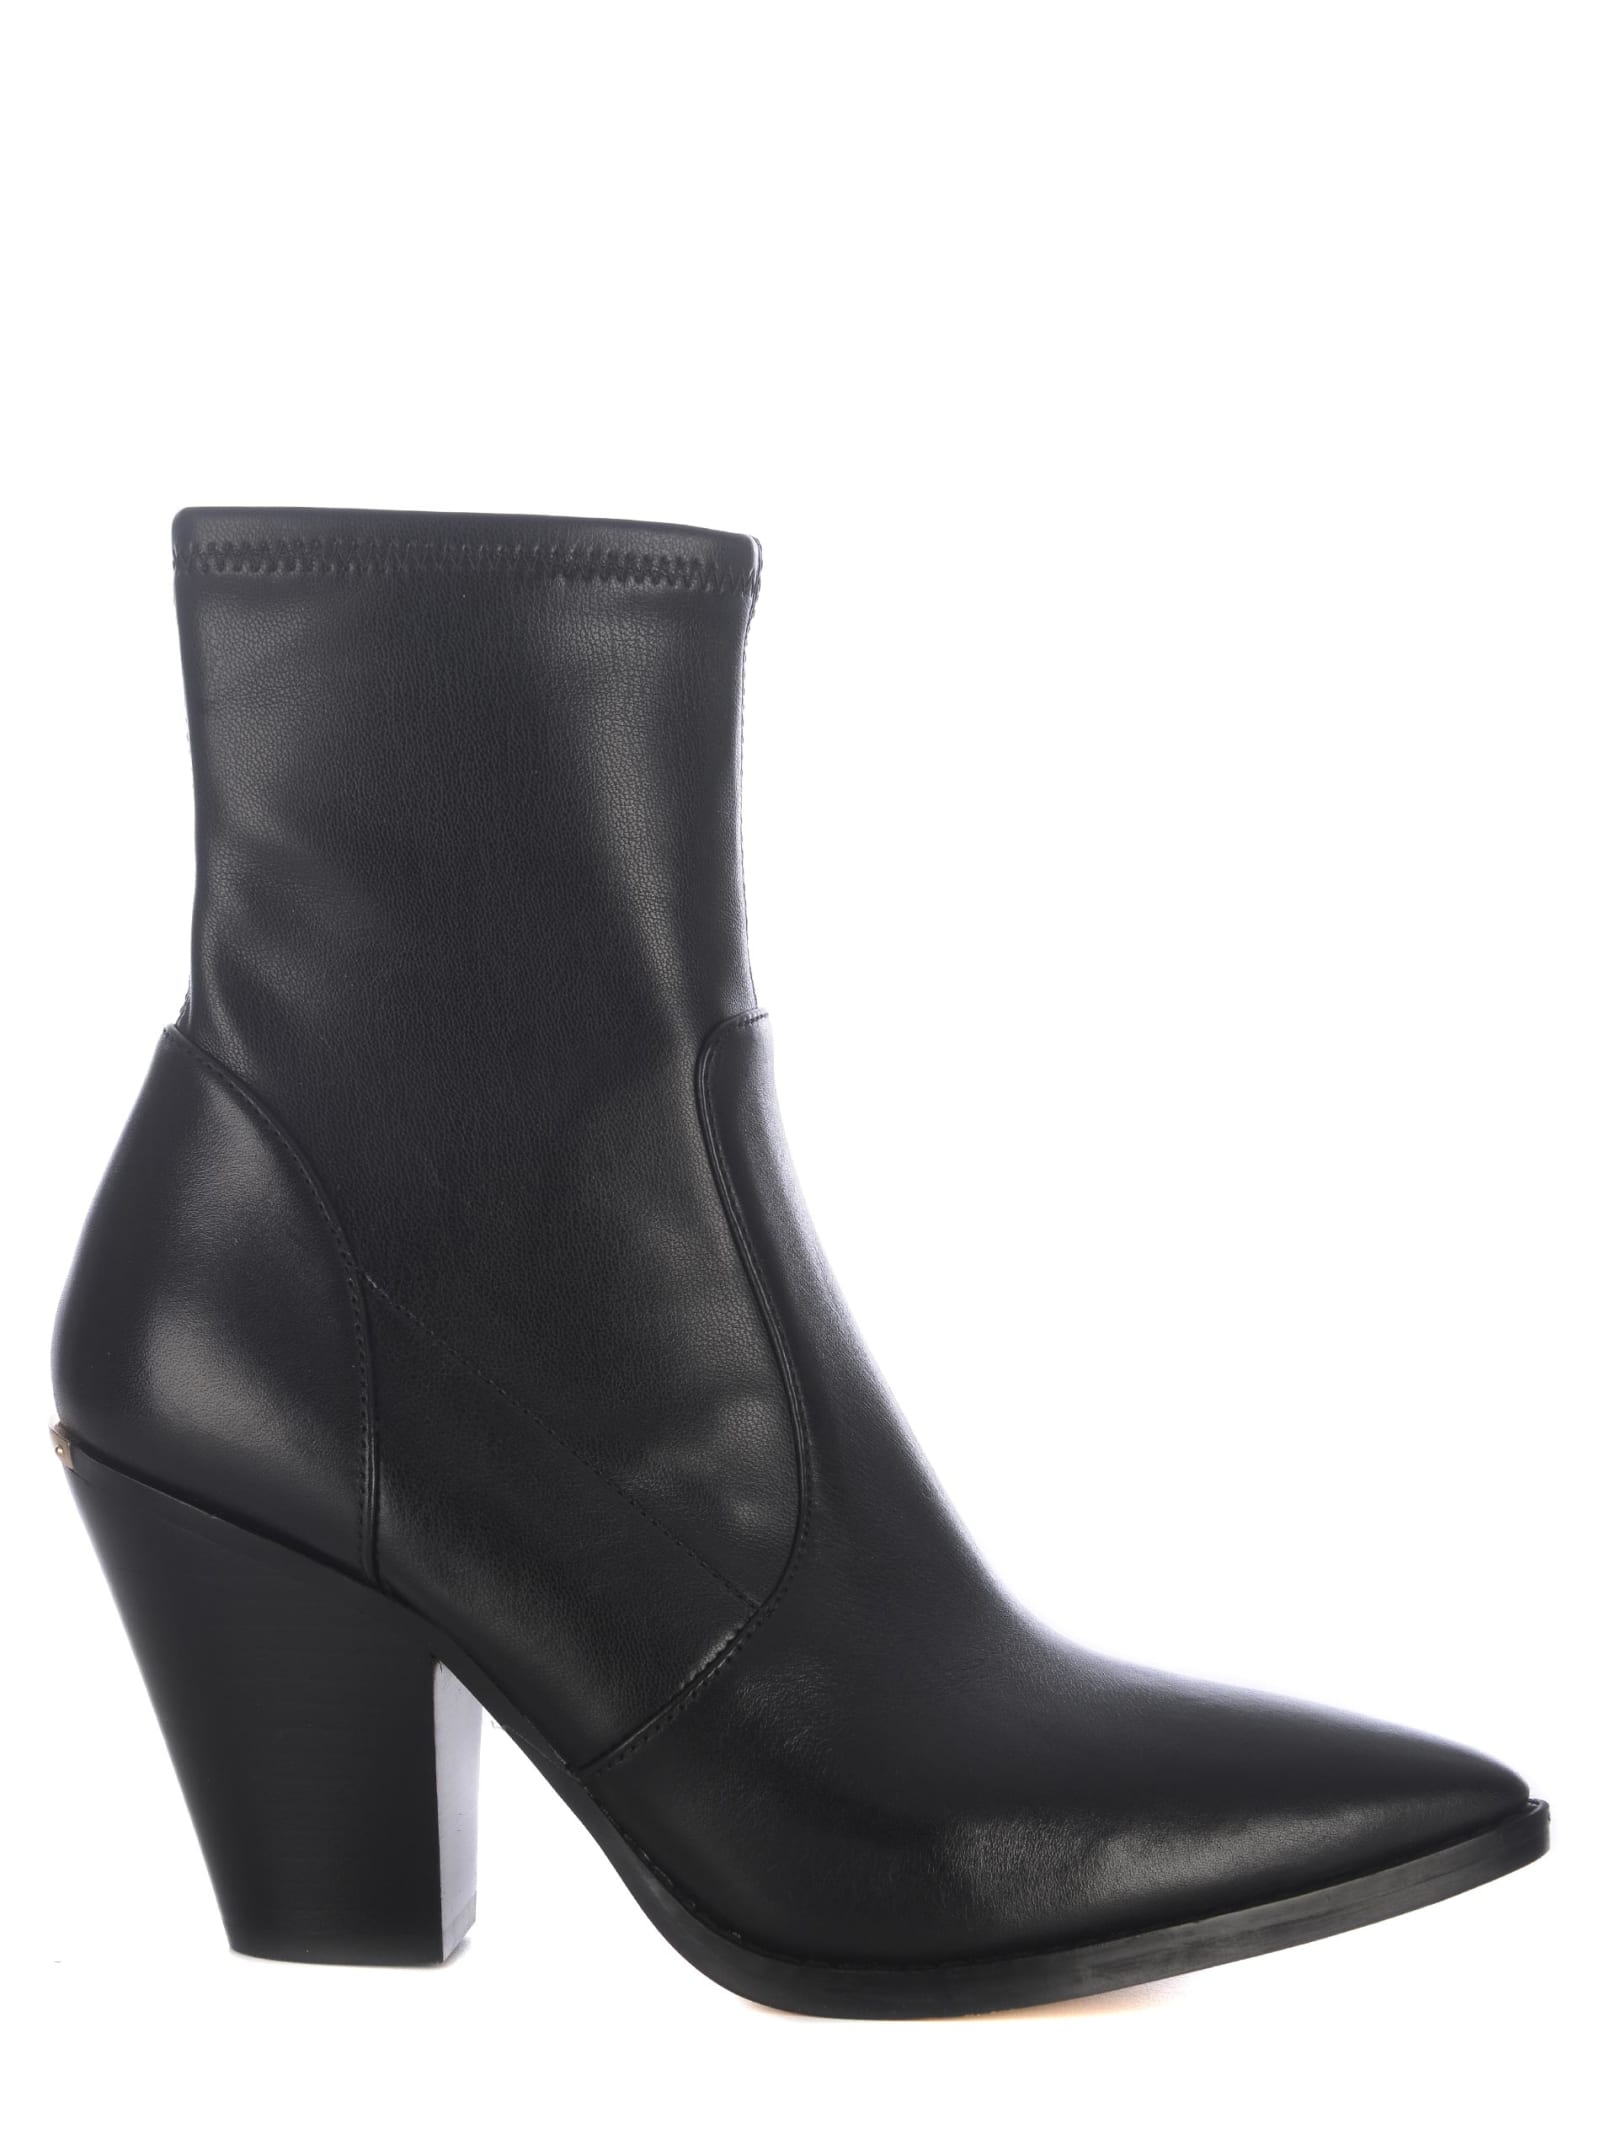 Boots Michael Kors dover In Leather - Nero - female - Size: 6